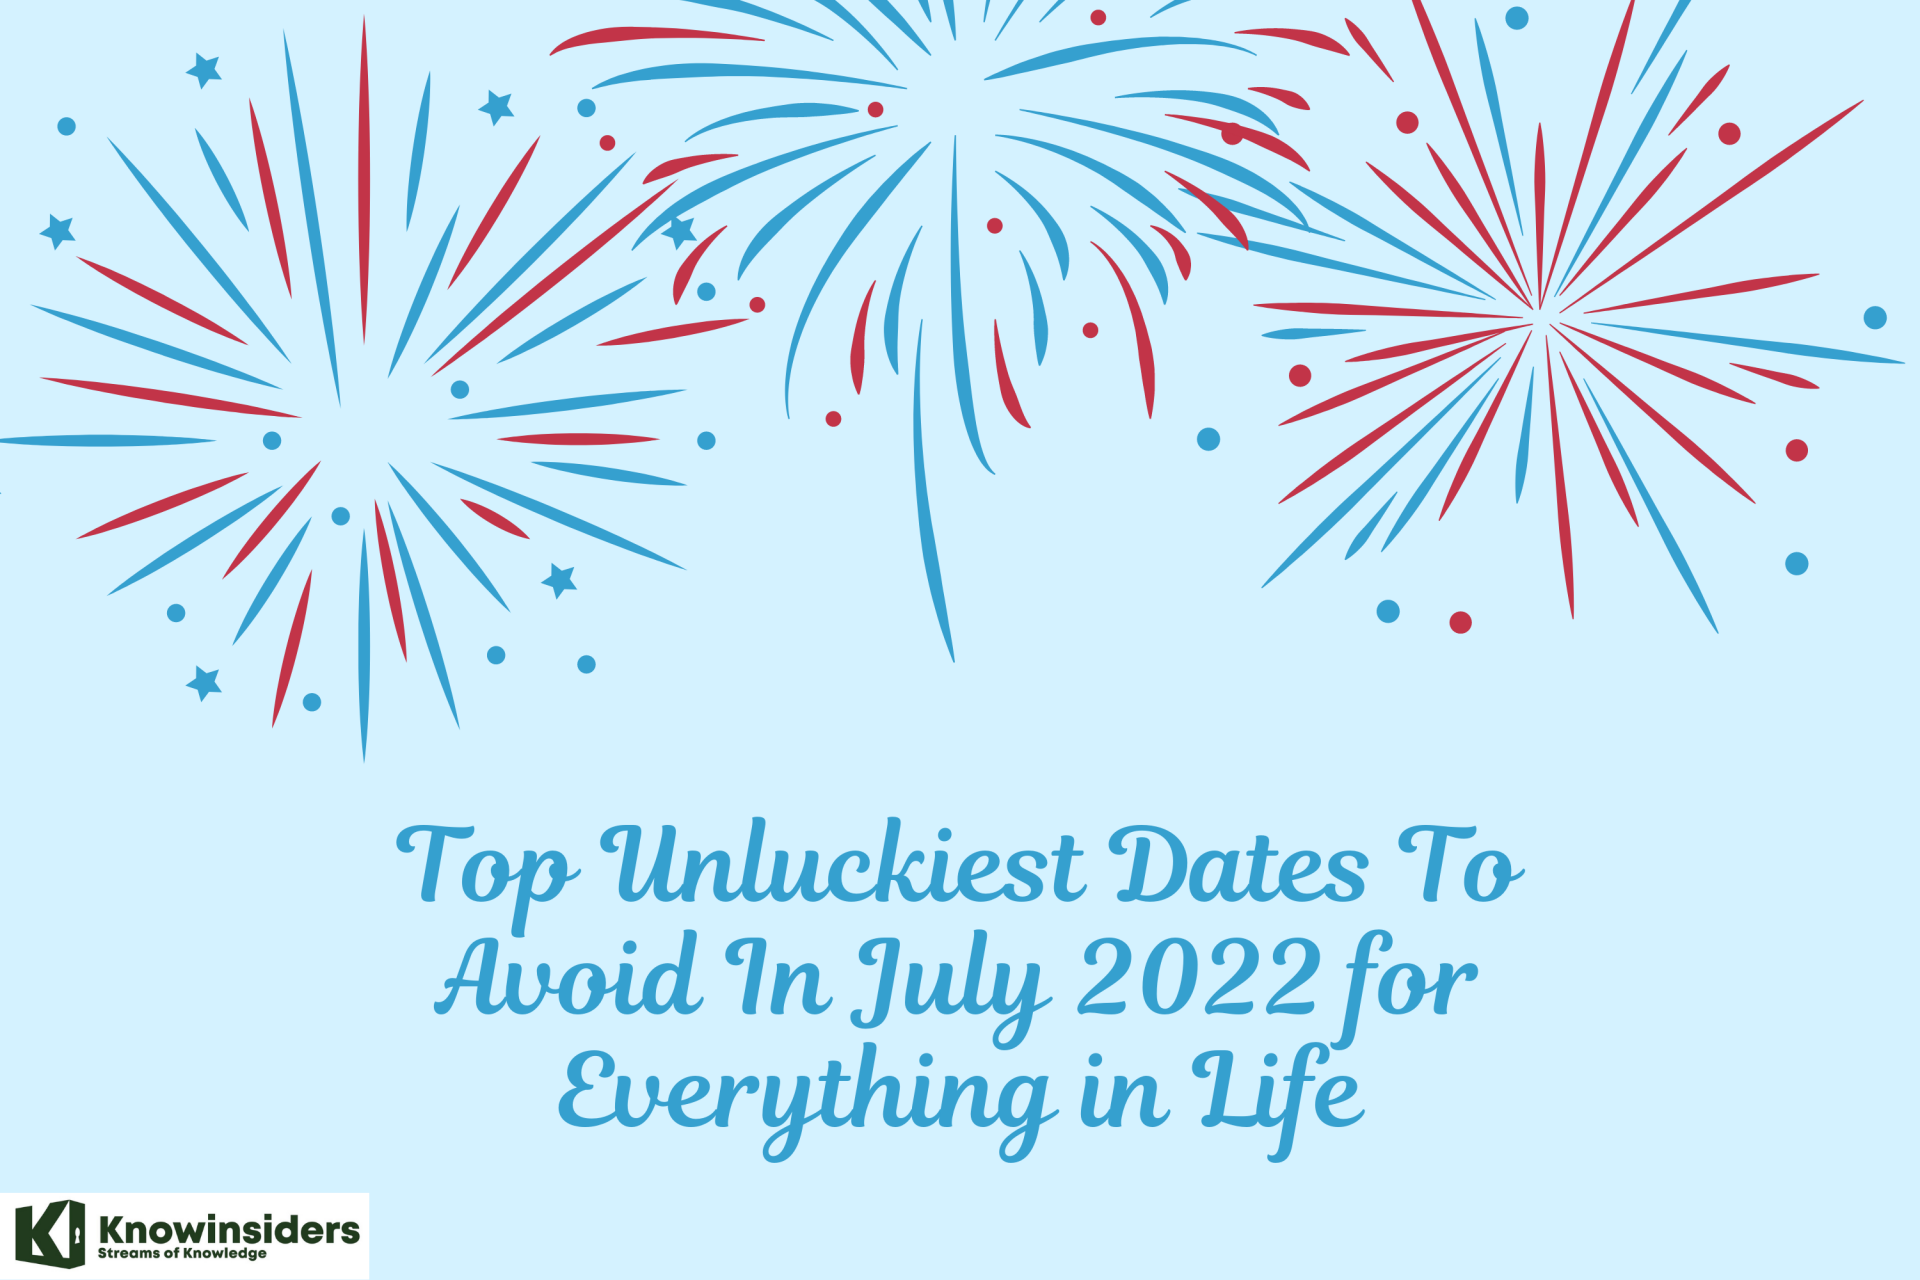 Top Inauspicious Dates To Avoid In July 2022 for Everything in Life